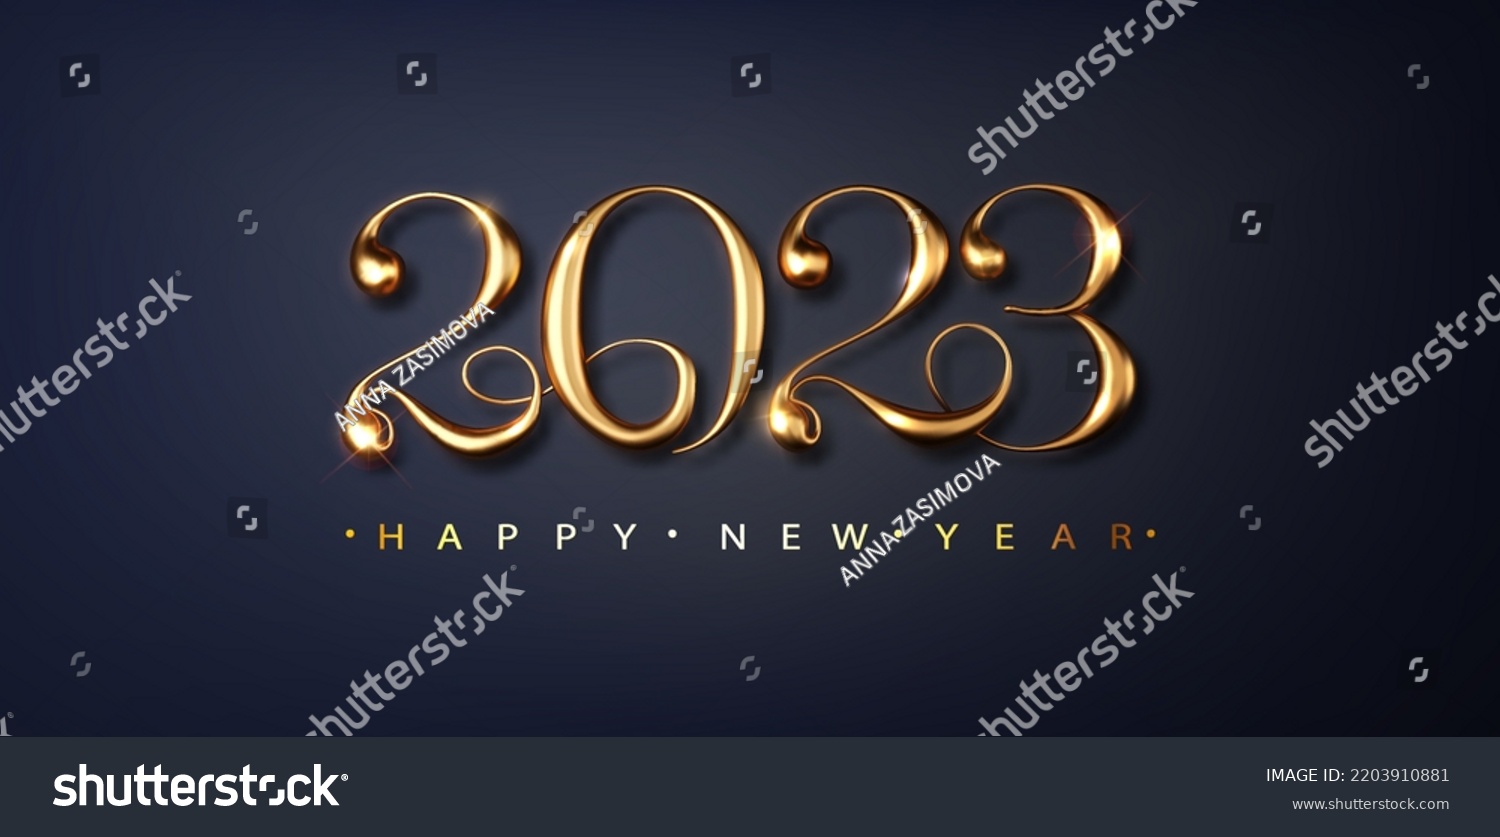 Happy new year 2023 banner. Golden Vector luxury text 2023 Happy new year. Gold Festive Numbers Design #2203910881